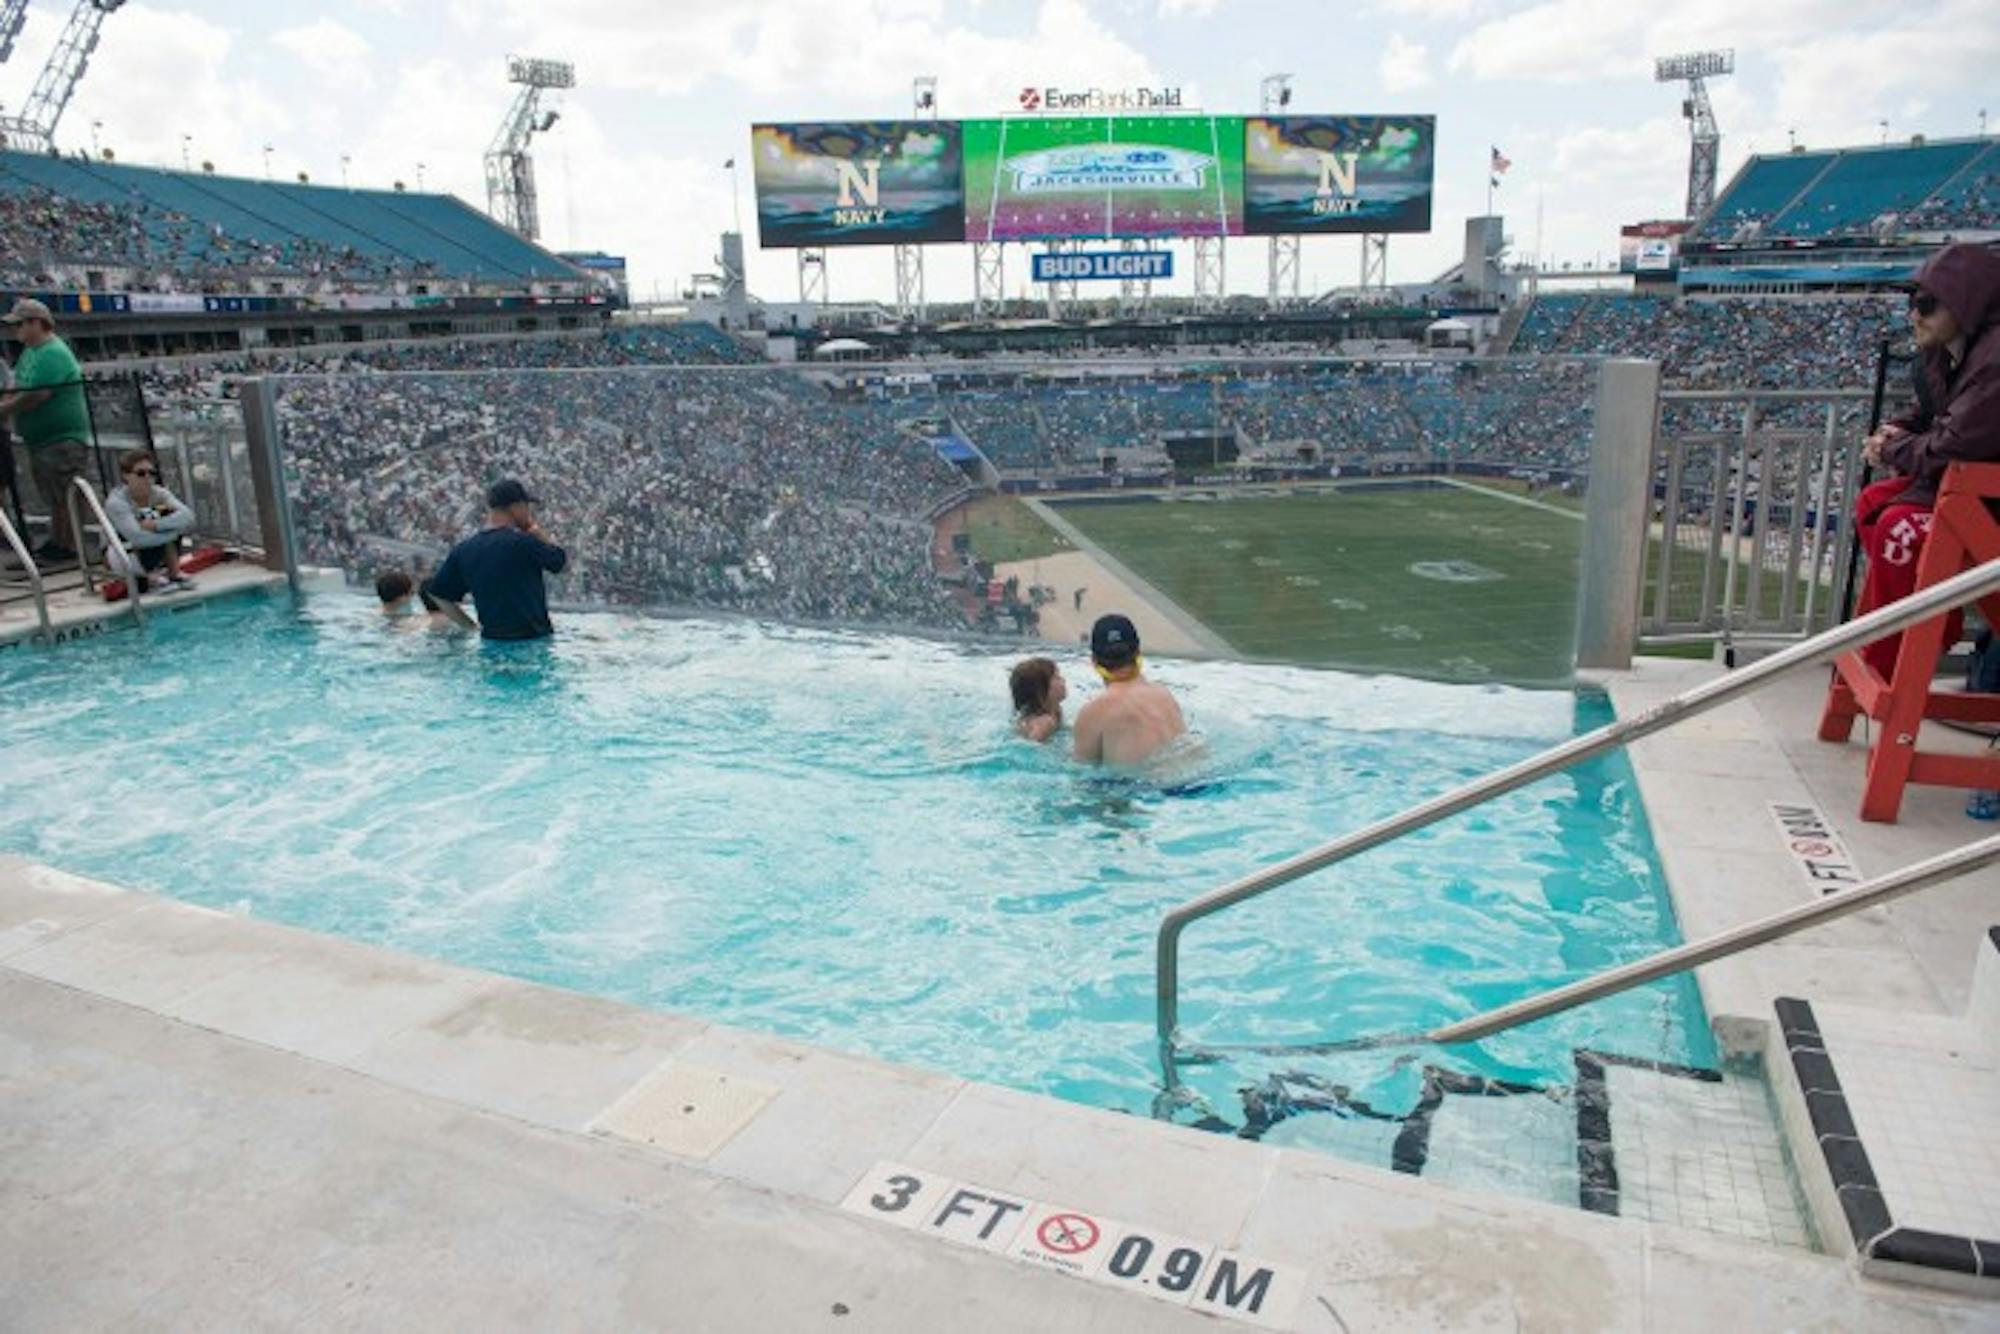 Fans overlook Everbank Field in pool inside stadium. A plexiglass side allows for watching the game even while underwater.